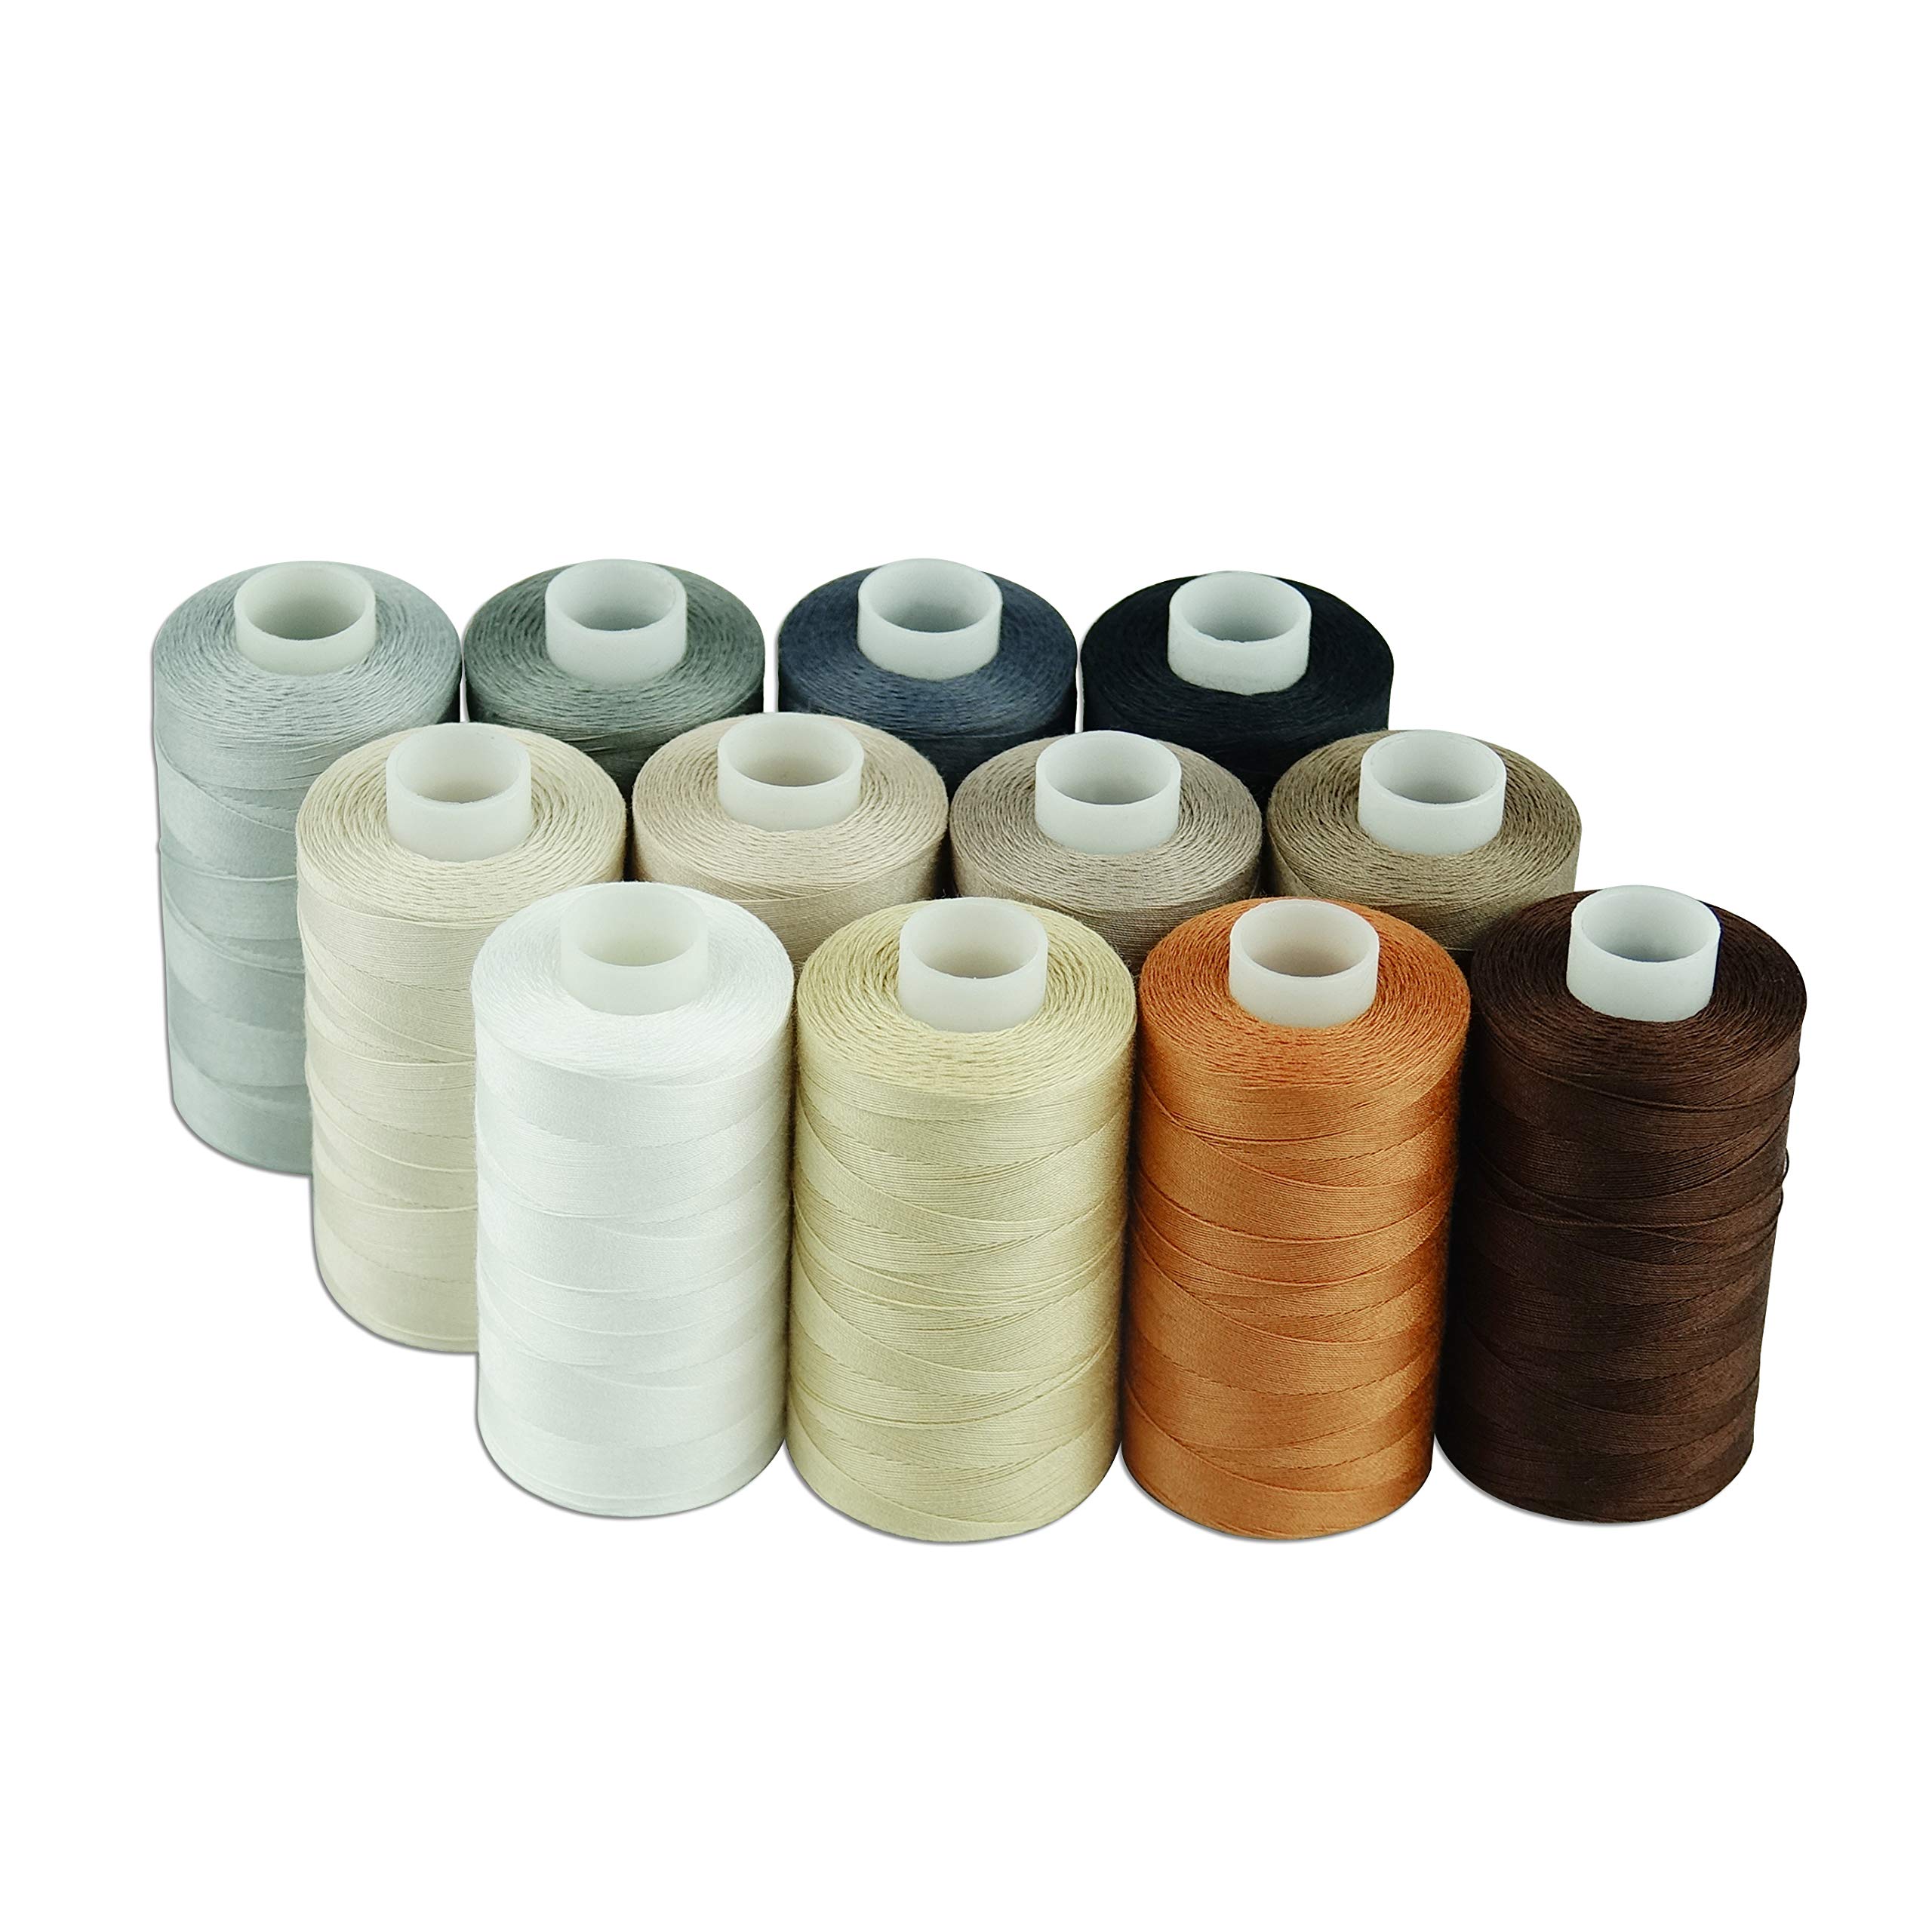 Simthread 12 Multi Colors All Purposes Cotton Quilting Thread 50s/3 Thread  for Piecing Sewing etc - 550 Yards Each (Neutral Colors) 12 Neutral colors